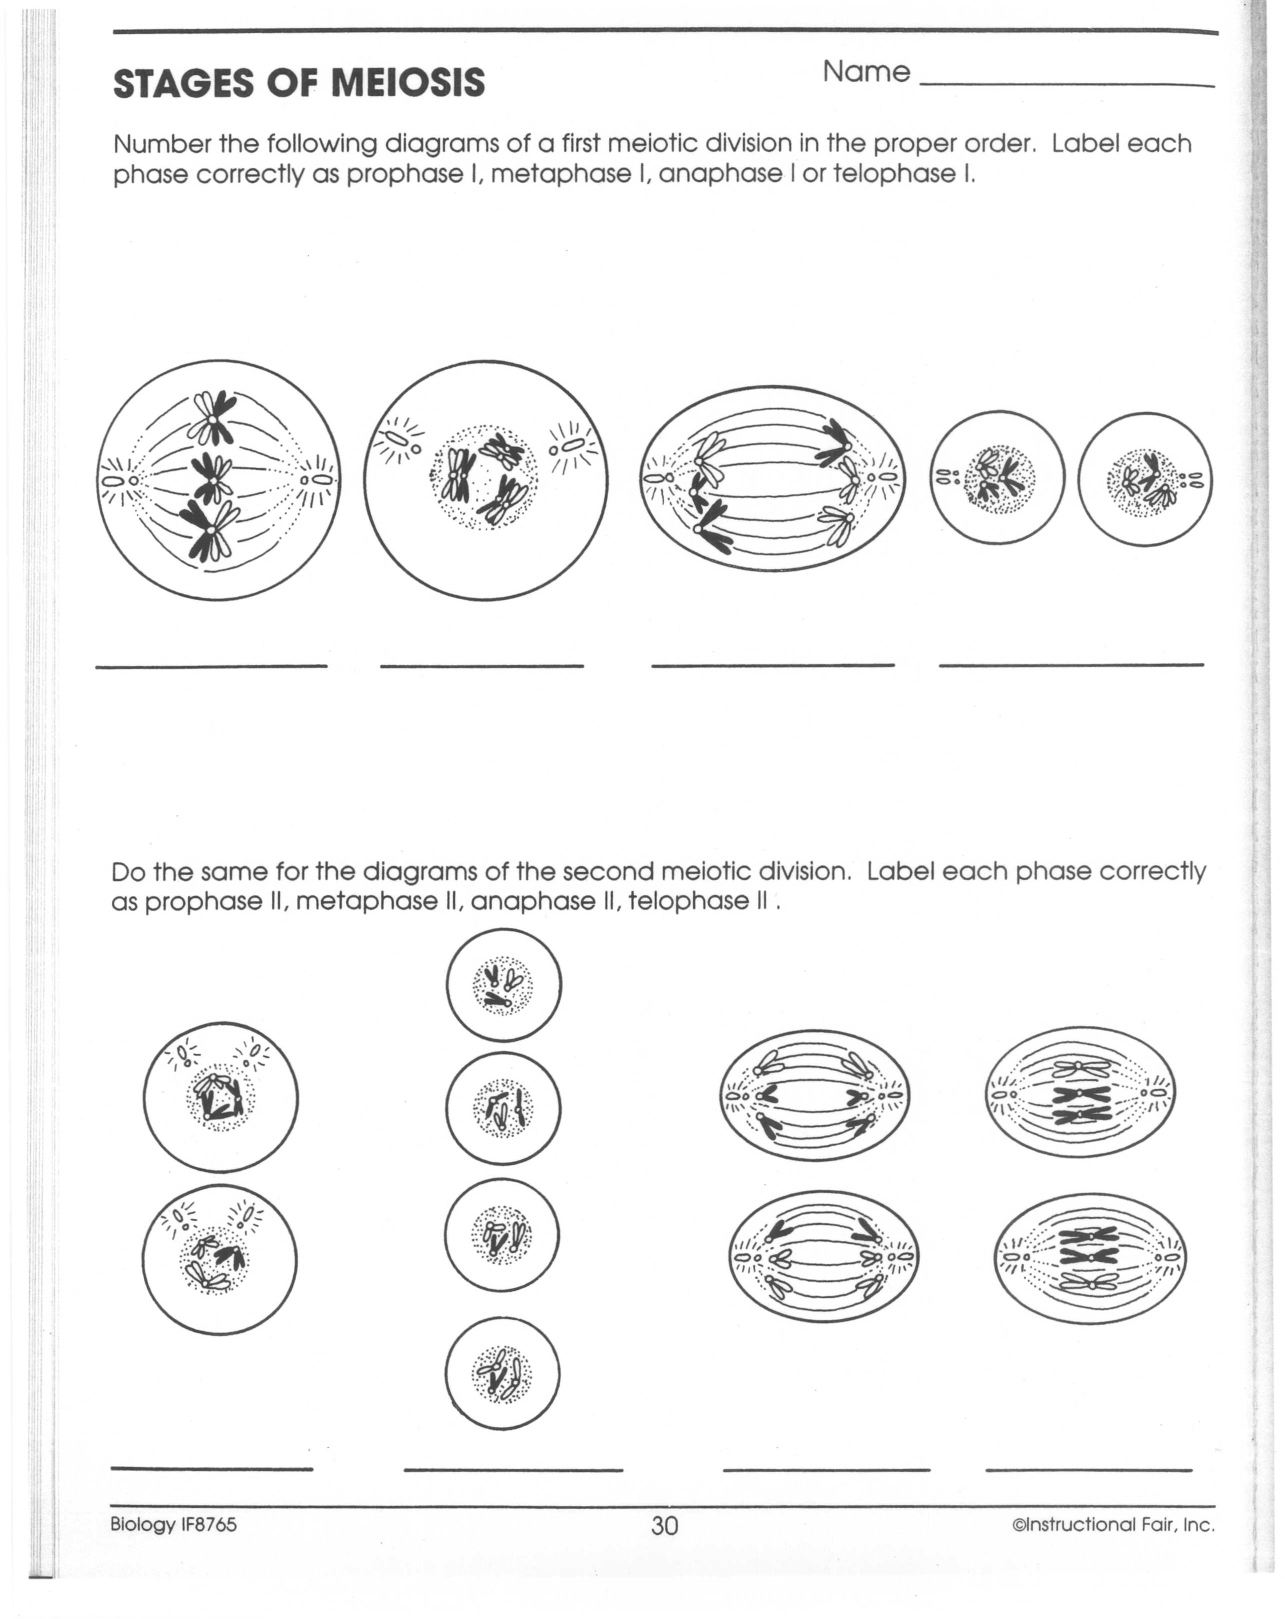 15 Best Images Of Phases Of Meiosis Worksheet Meiosis Stages Worksheet Meiosis Stages 